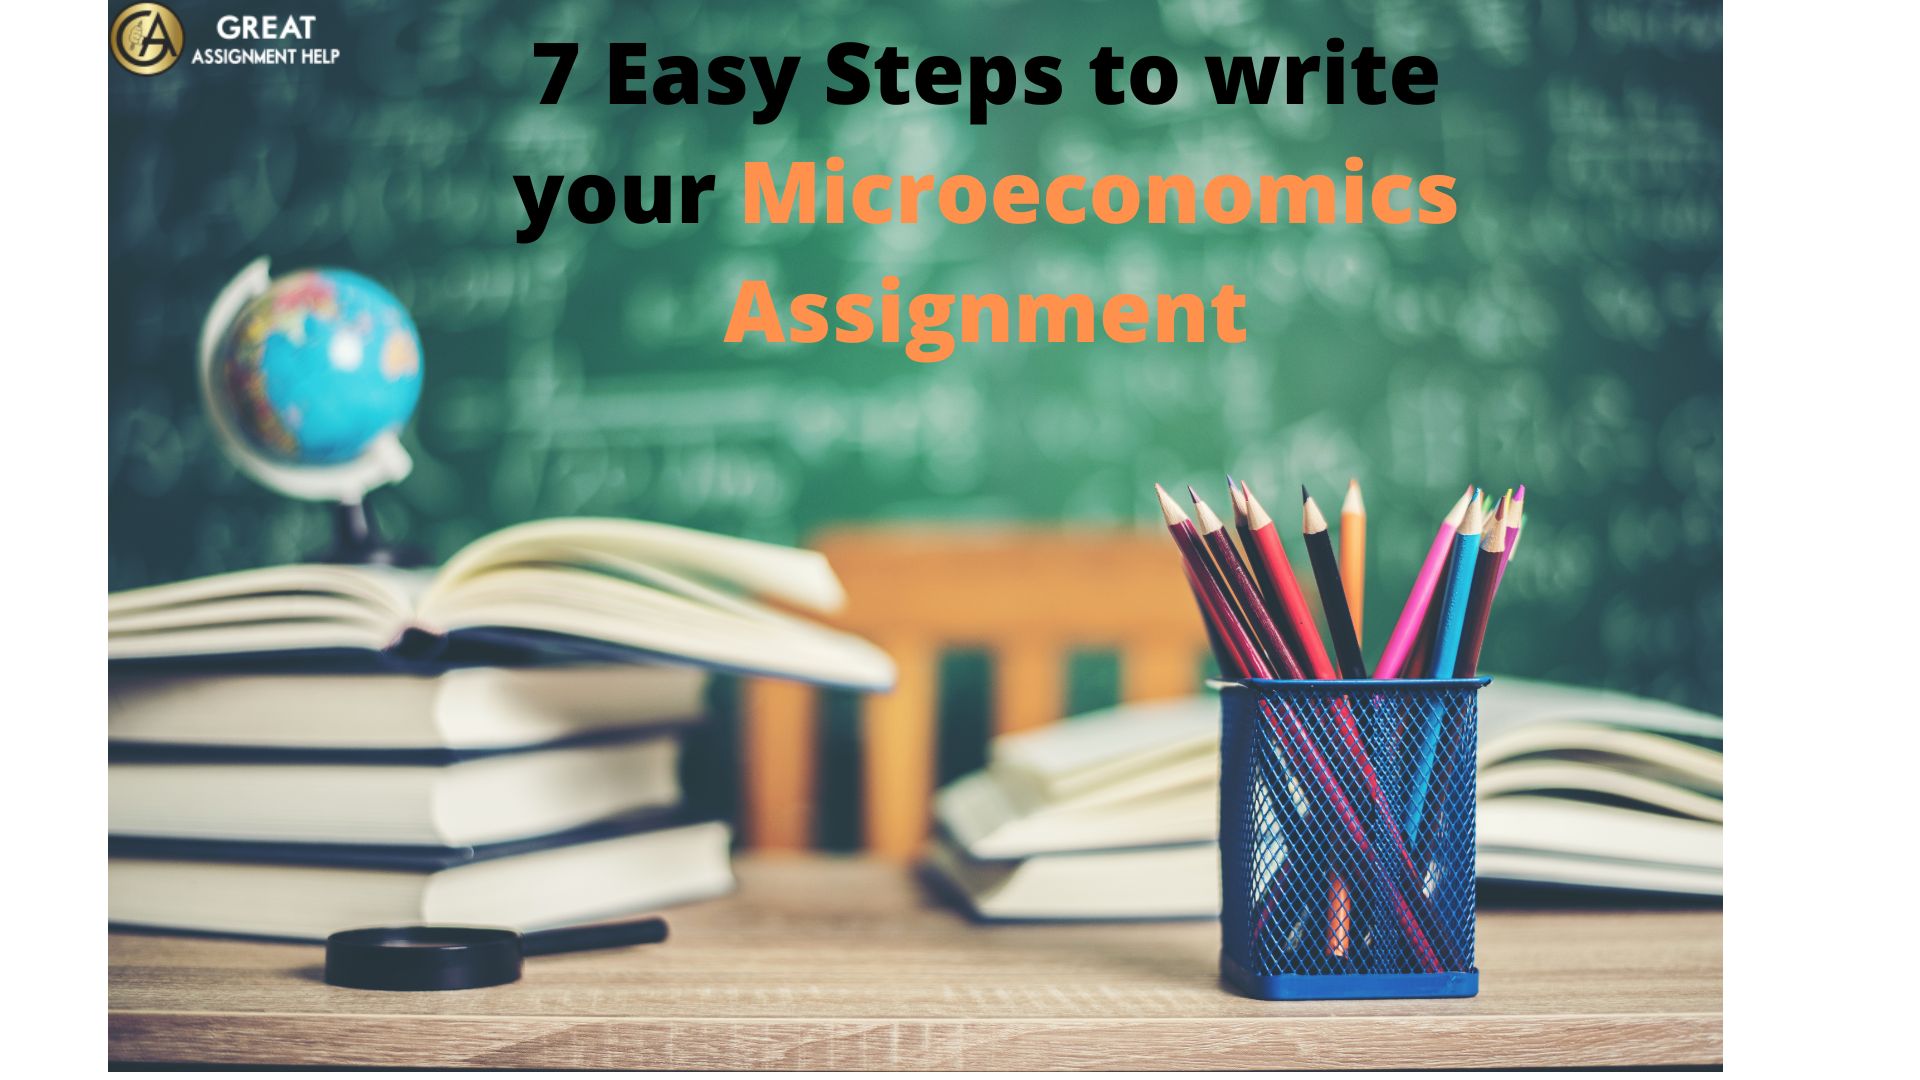 7 Easy Steps to write your Microeconomics Assignment